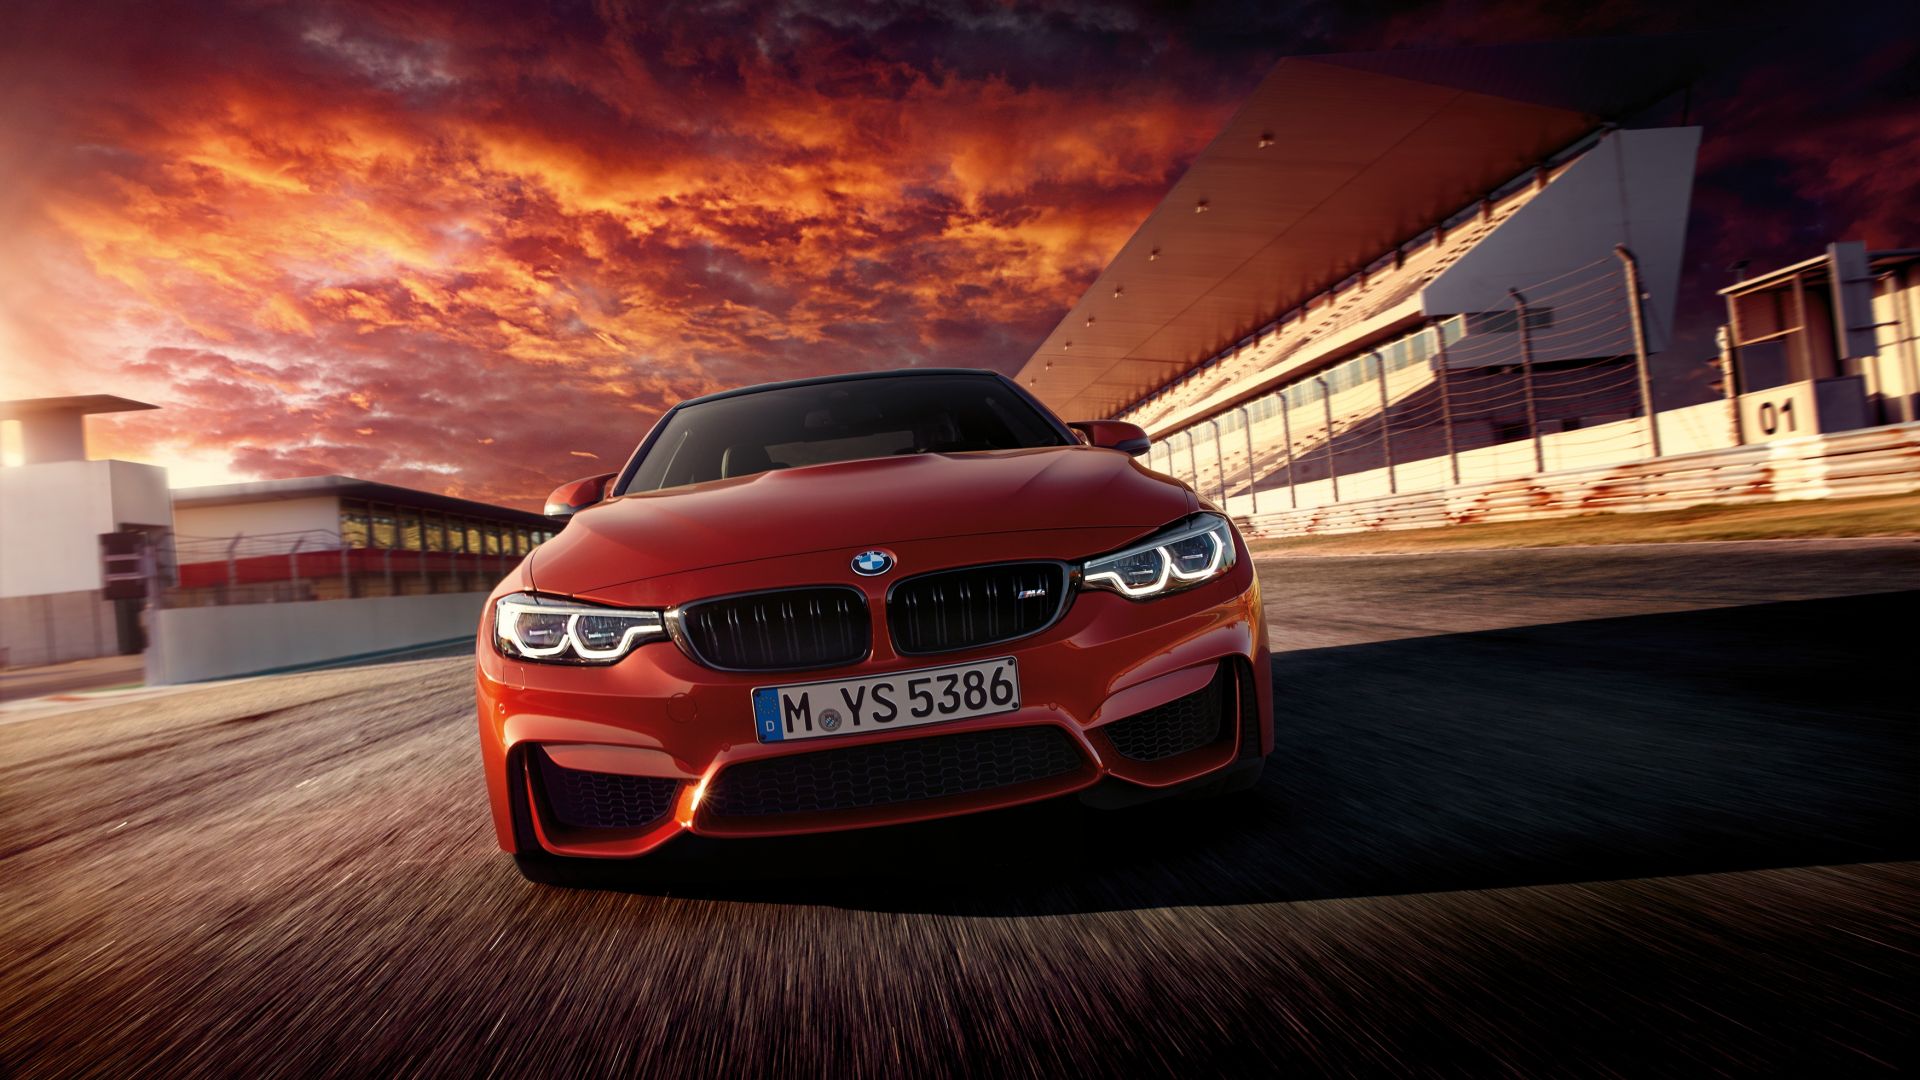 Wallpaper Luxury car, red cars, BMW M4, road